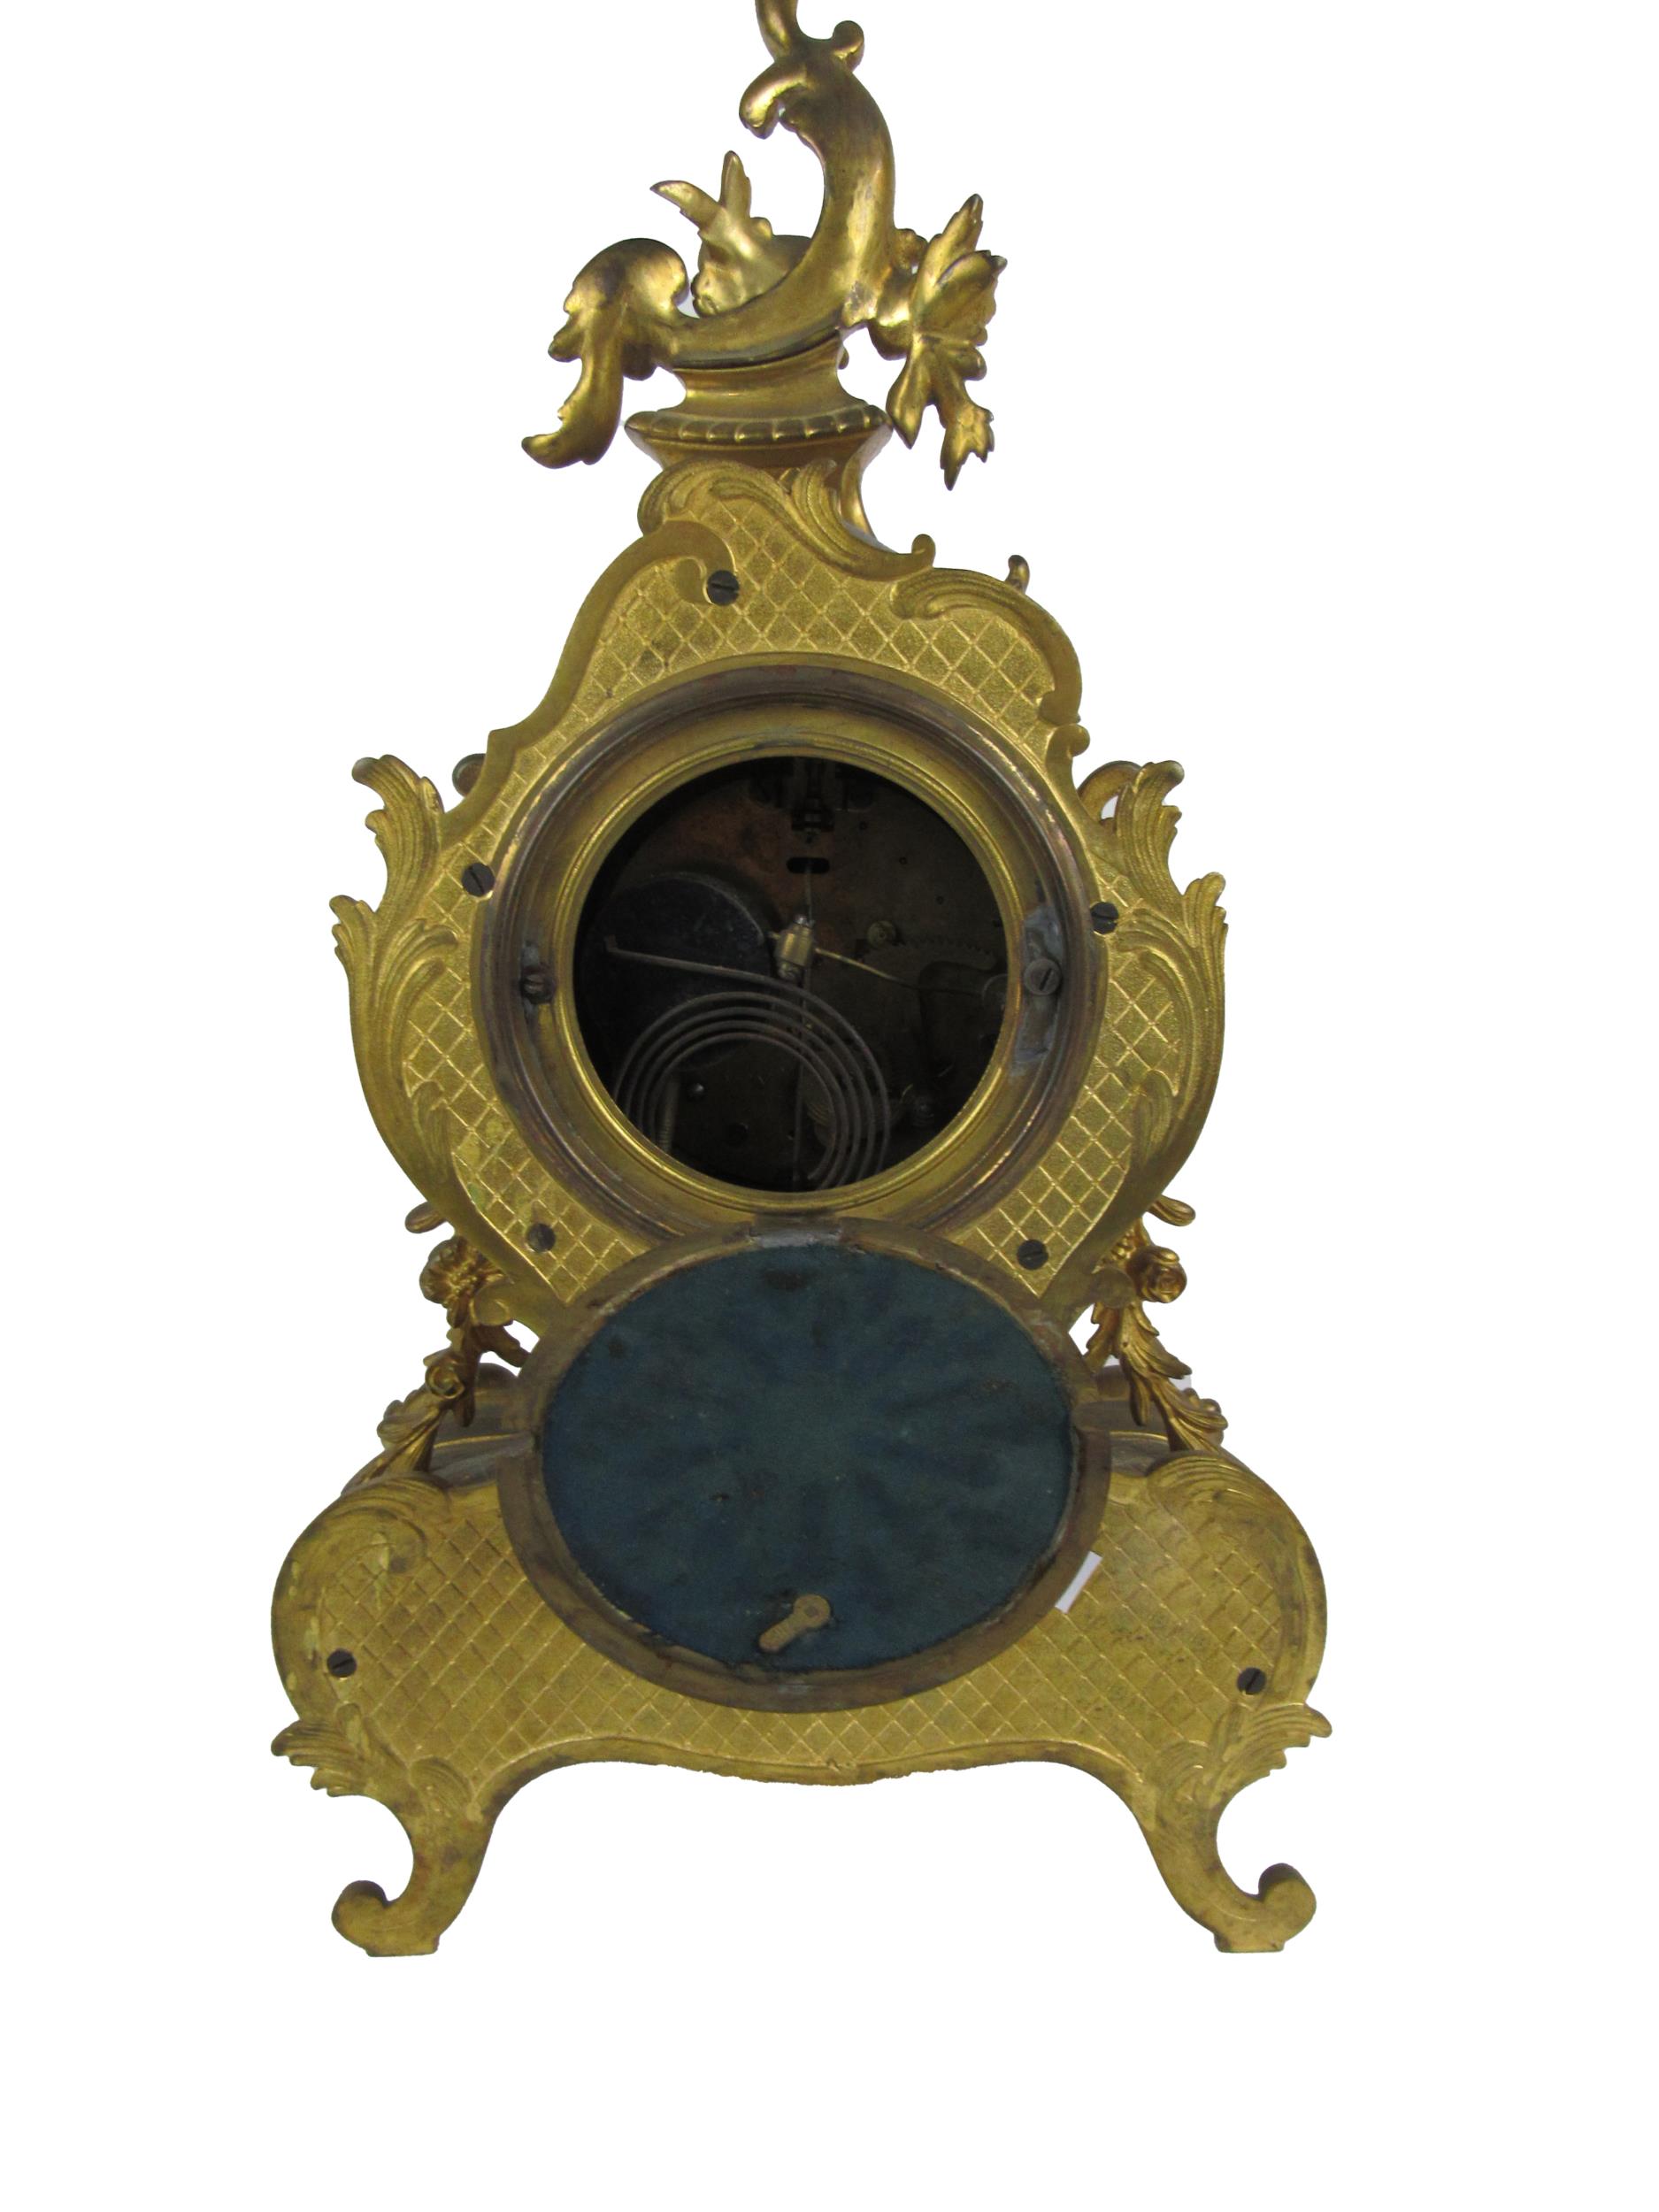 A fine quality Louis XVI French style ormolu Clock, the overall decorated in the rococo taste, - Image 2 of 3